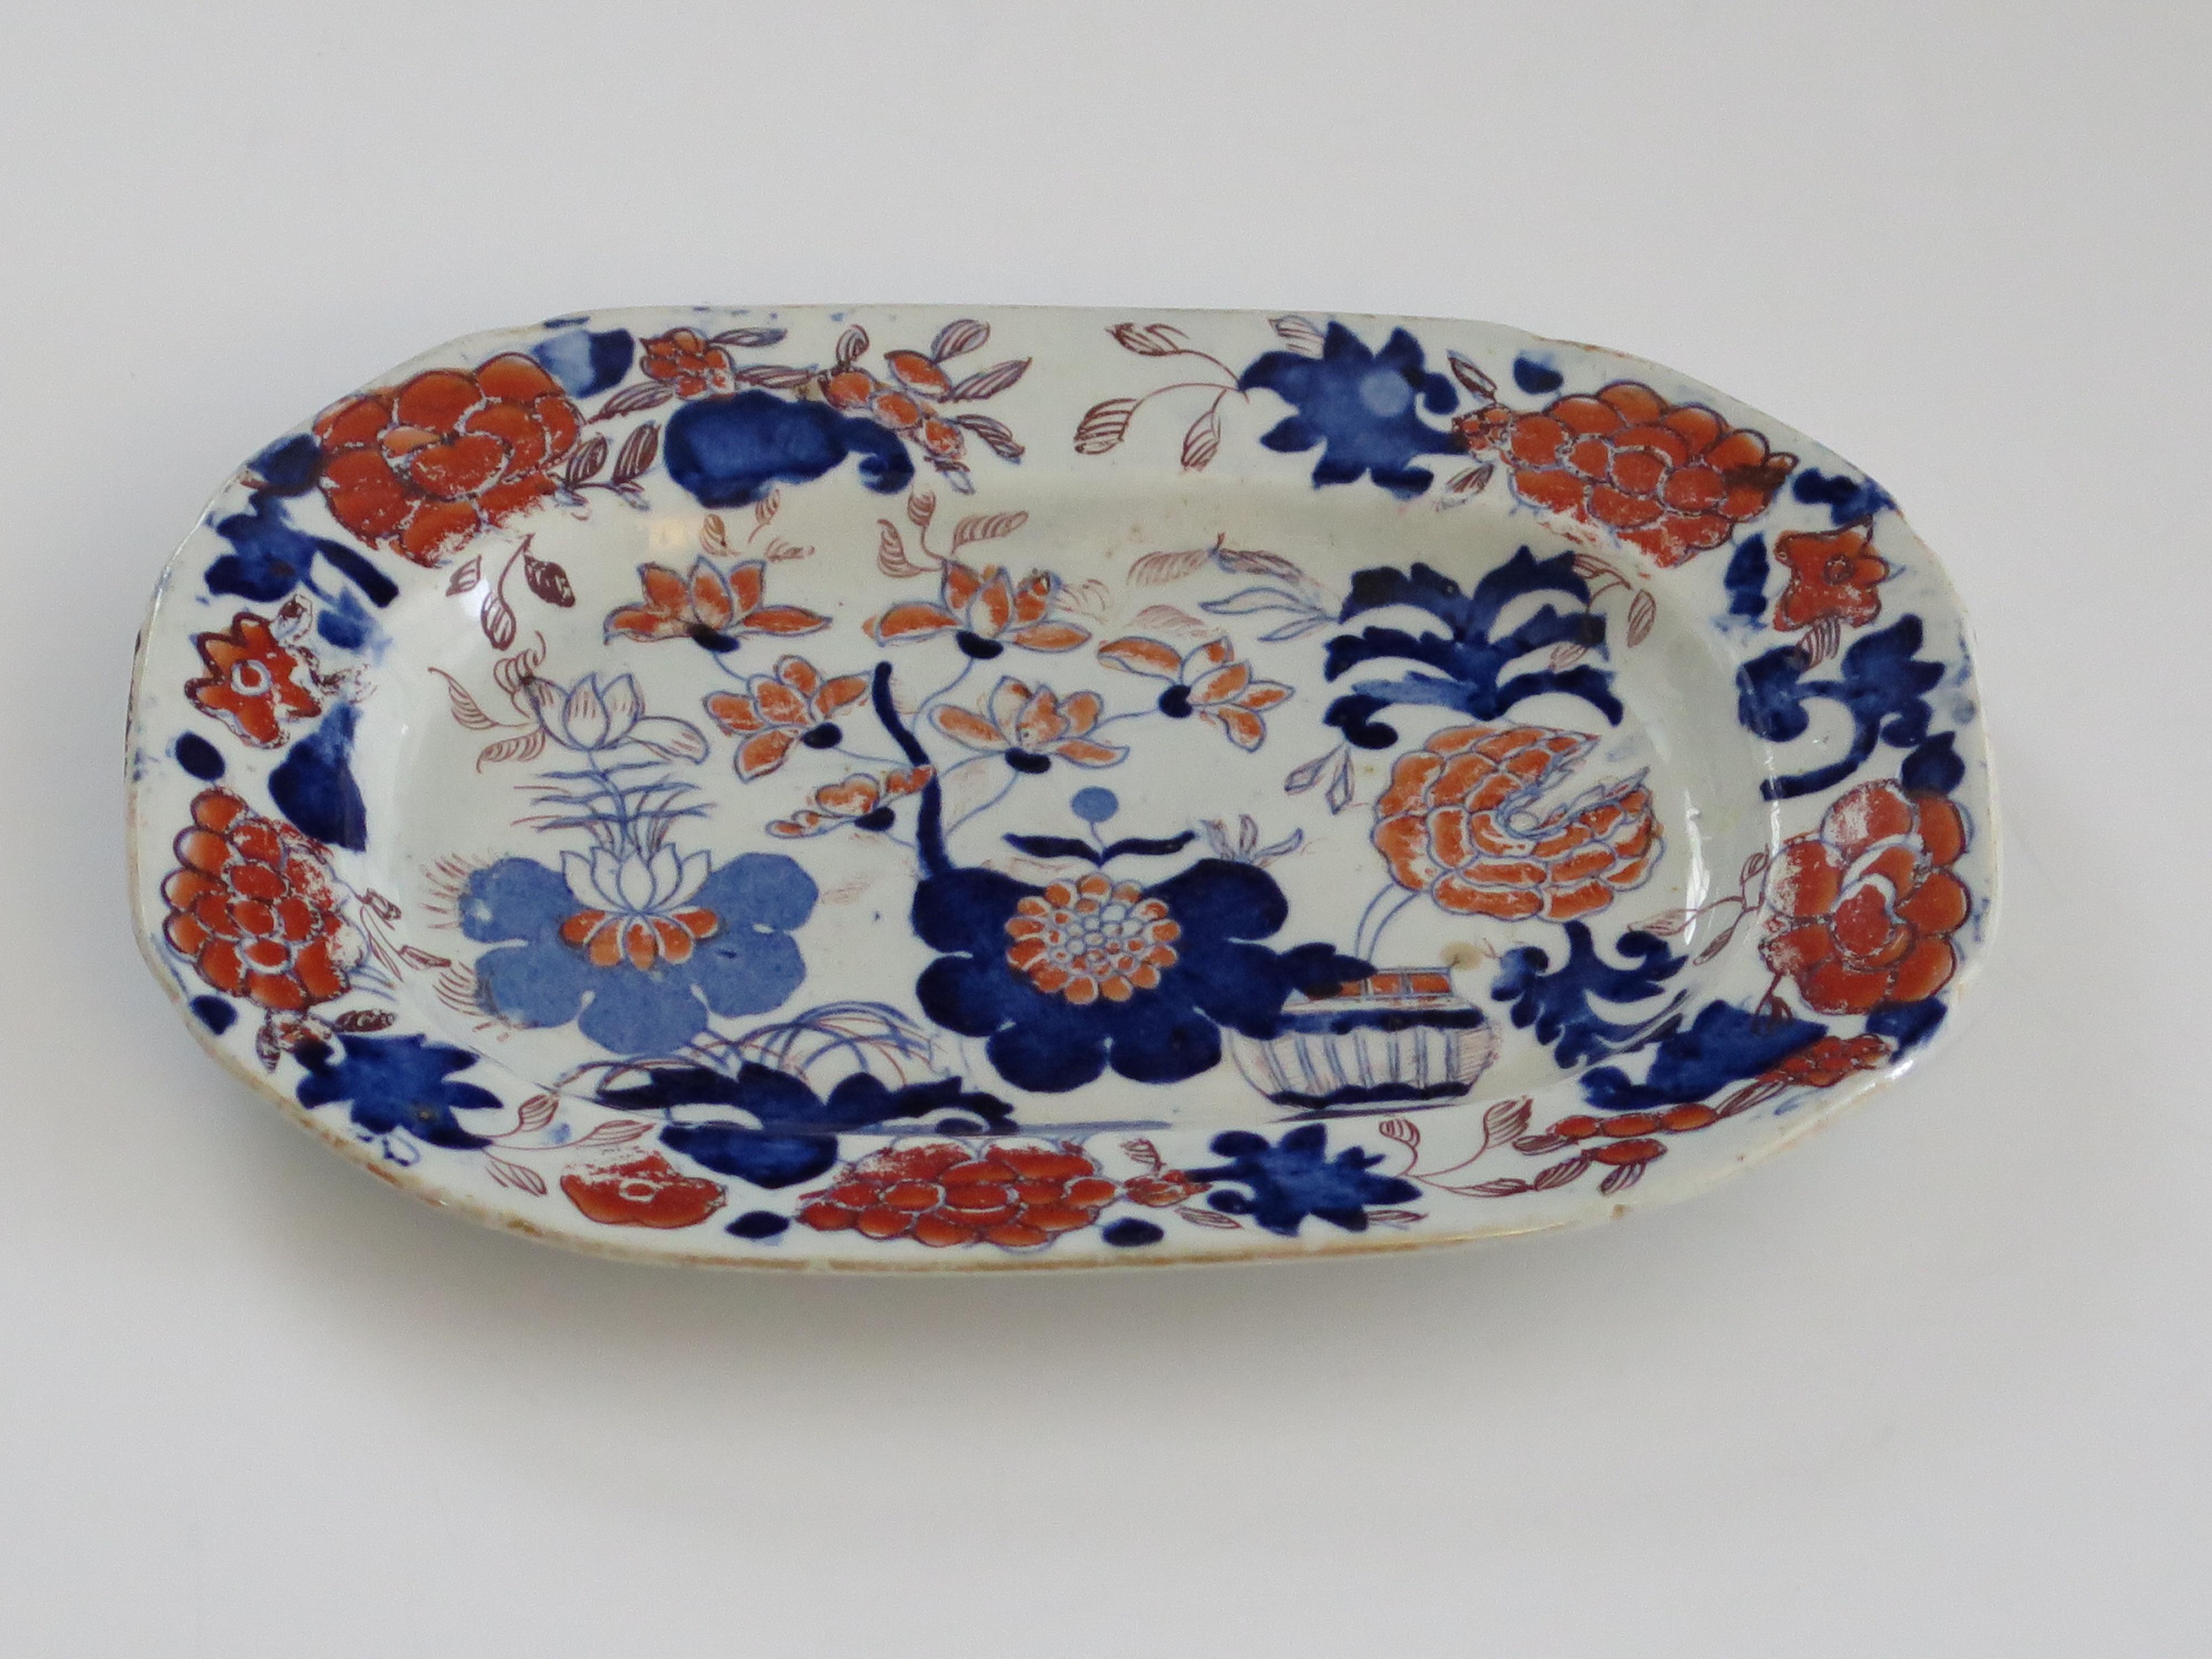 This is an early Mason's Ironstone pottery small rectangular platter, hand painted in the very decorative basket Japan pattern, produced by the Mason's factory at Lane Delph, Staffordshire, England, in the George 111rd period, circa 1813-1820.

The